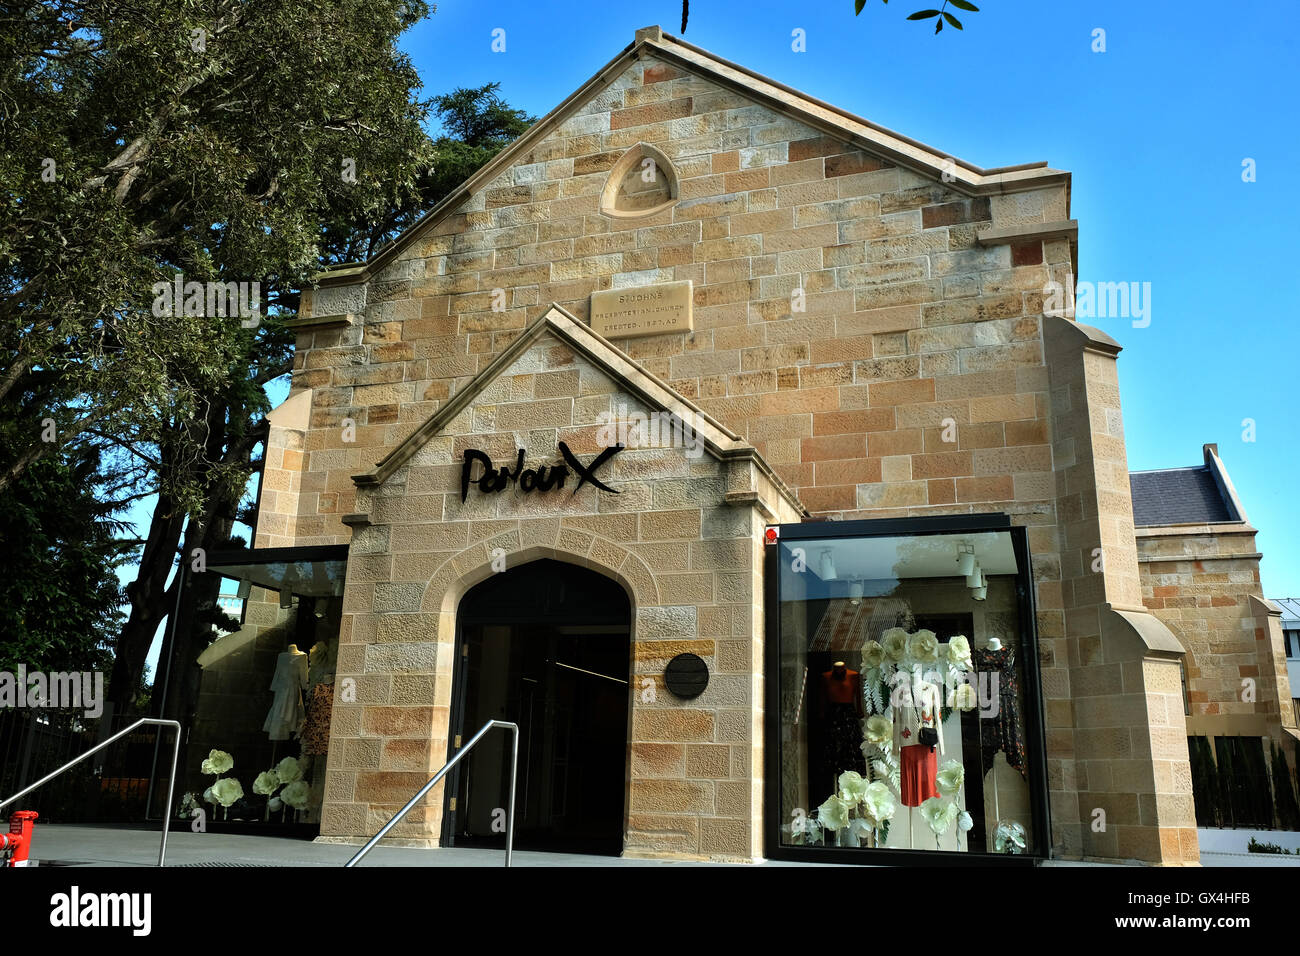 Palour X is the old sandstone St Johns church built in Paddington Sydney in 1859. It is currently used as a fashion design outle Stock Photo